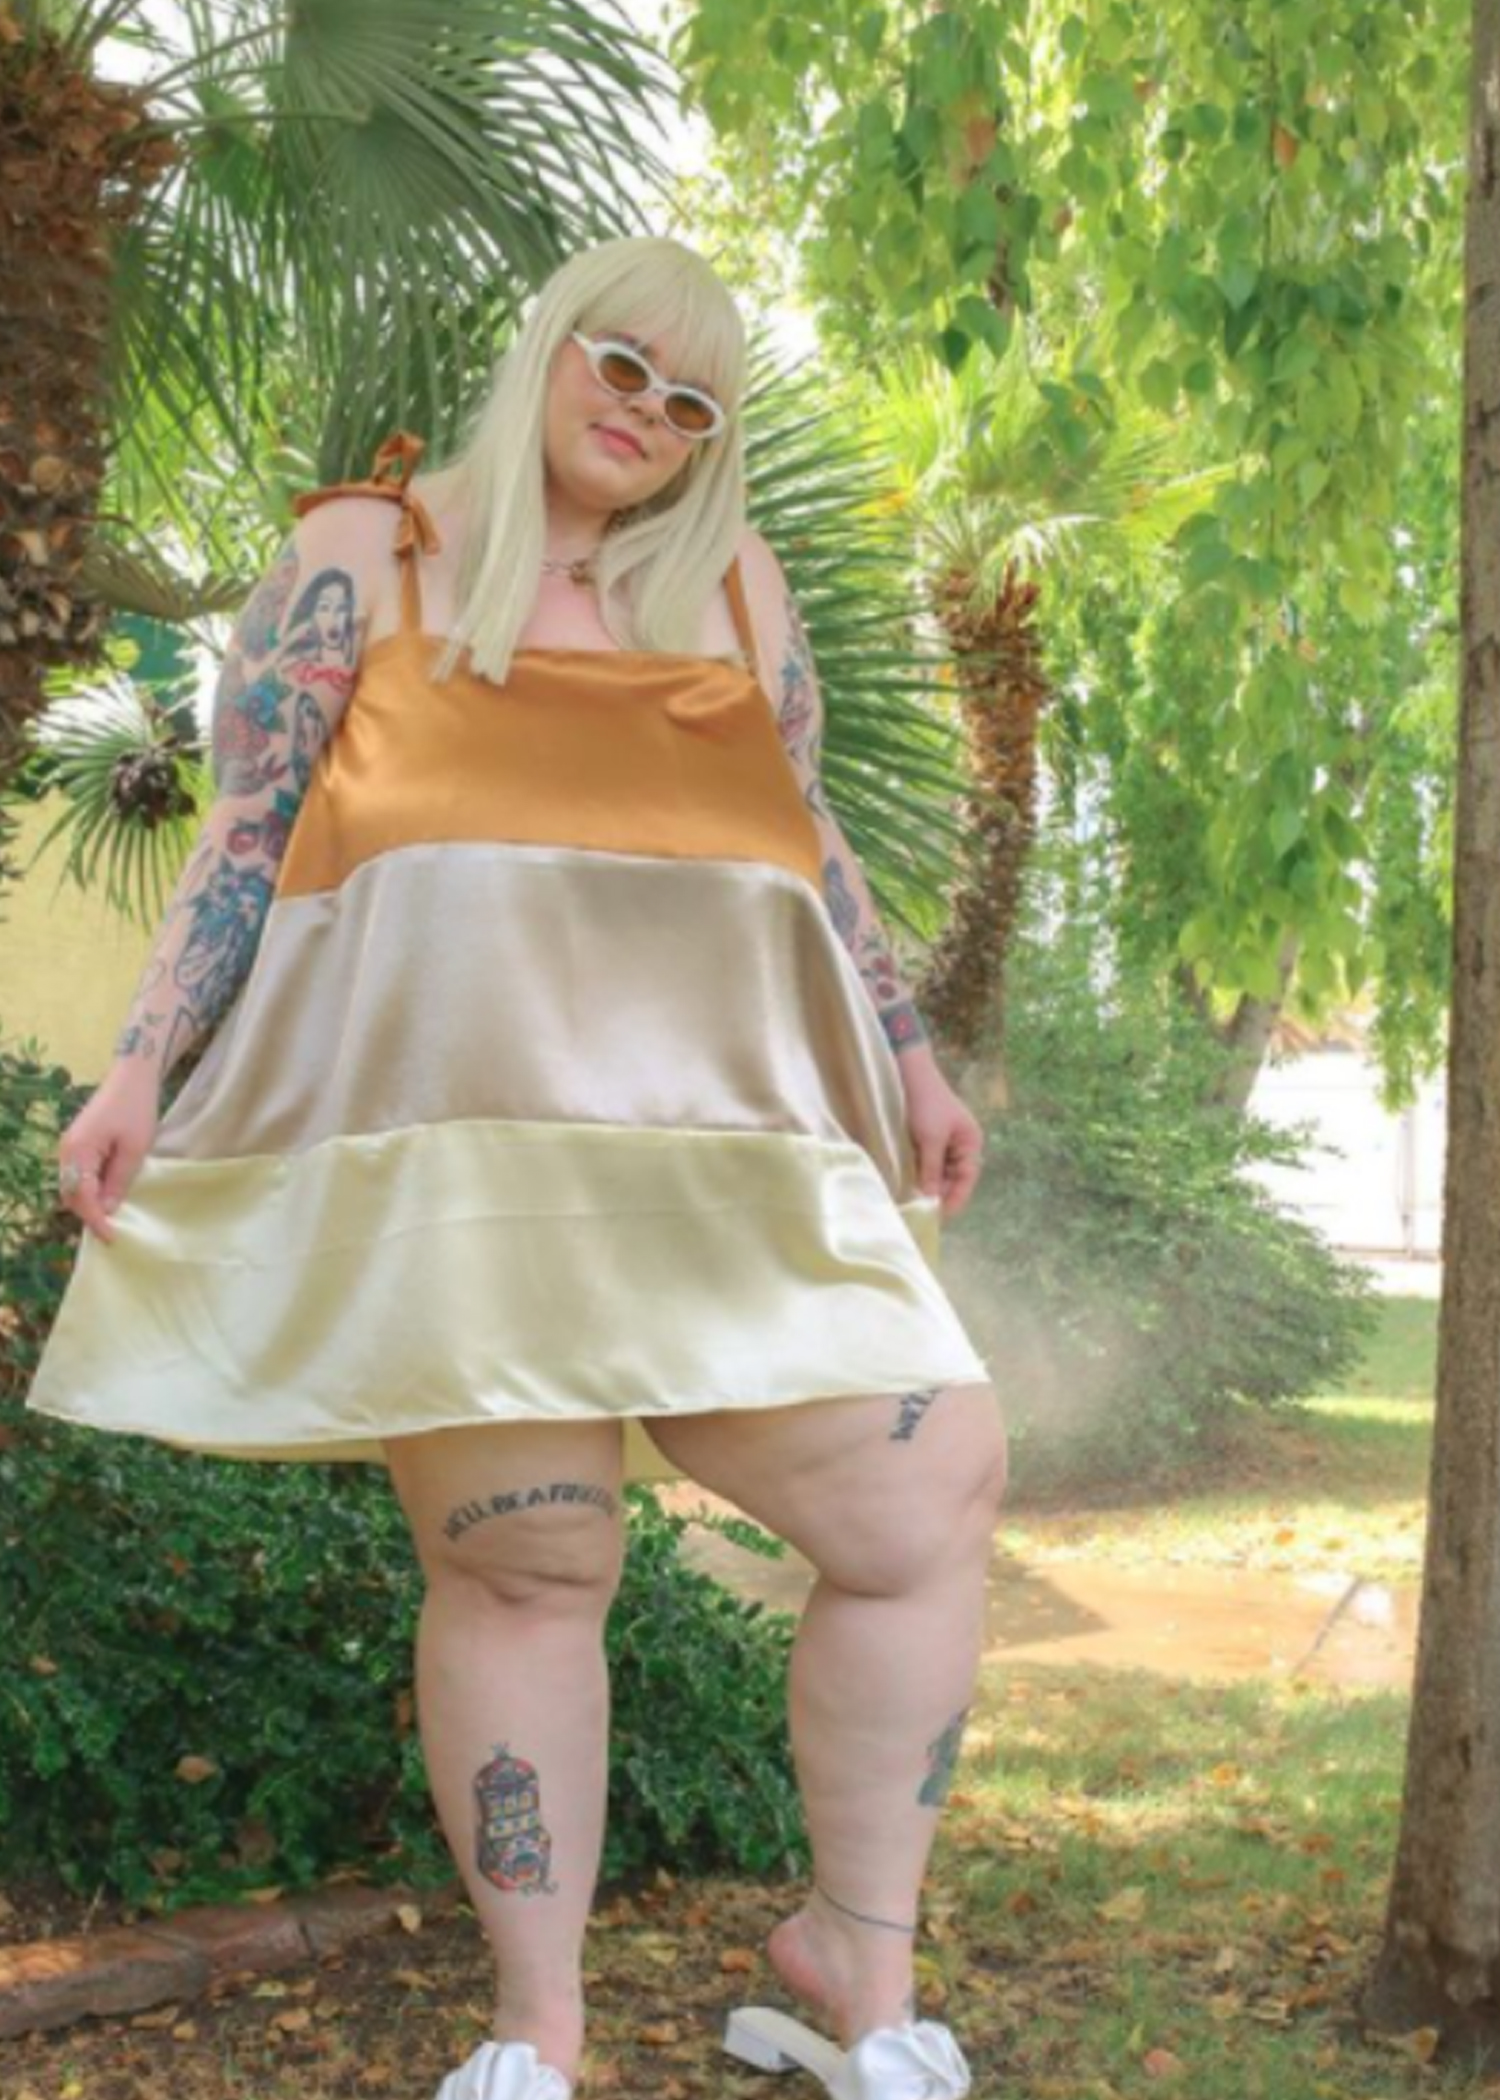 Caelyn wearing a gold and cream mini dress in front of palm trees